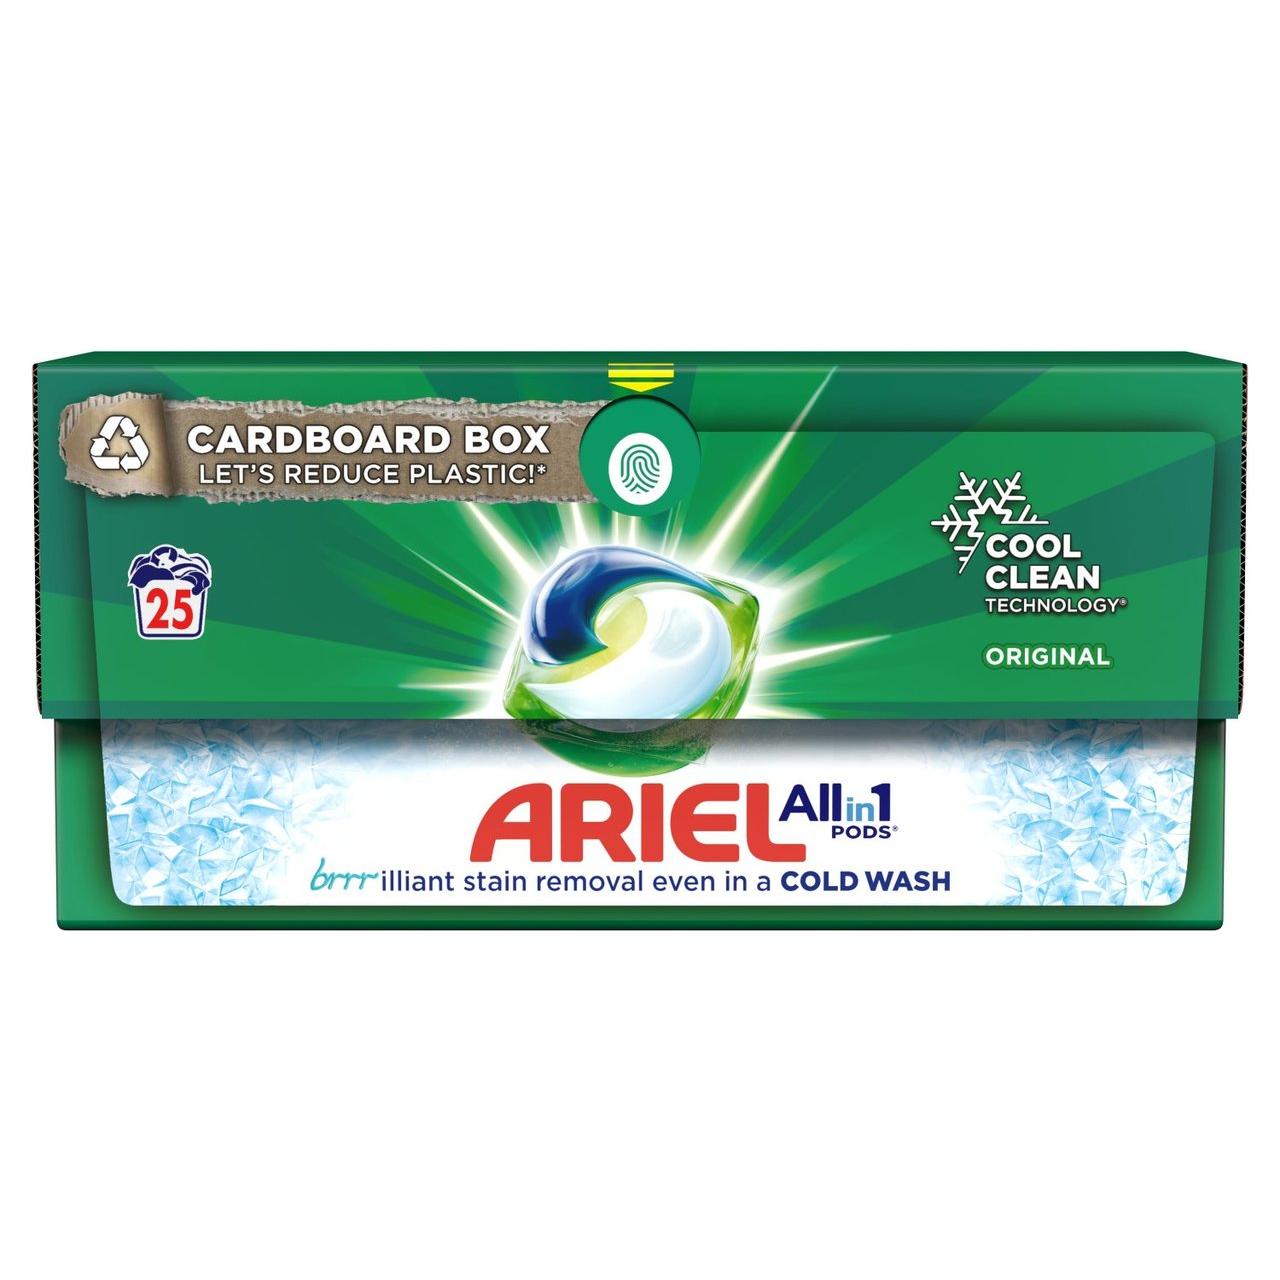 Ariel Original All-in-1 Pods, 25washes + Lenor Unstoppables in Wash Scent Booster Beads, 245gr, Scent of Ariel